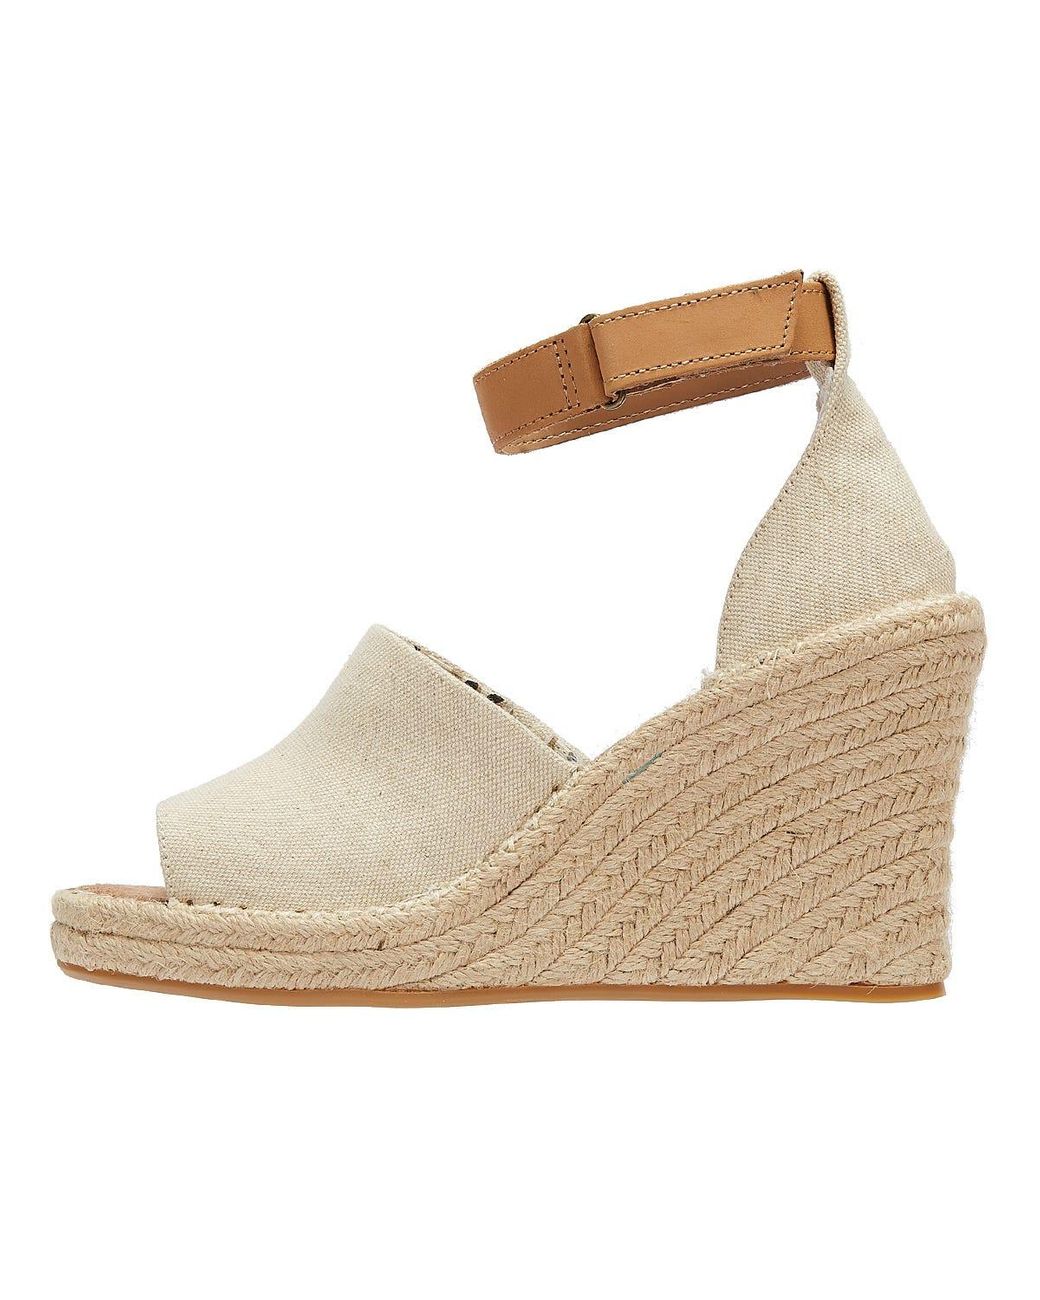 TOMS Marisol Wedges in Cream (Natural) - Lyst